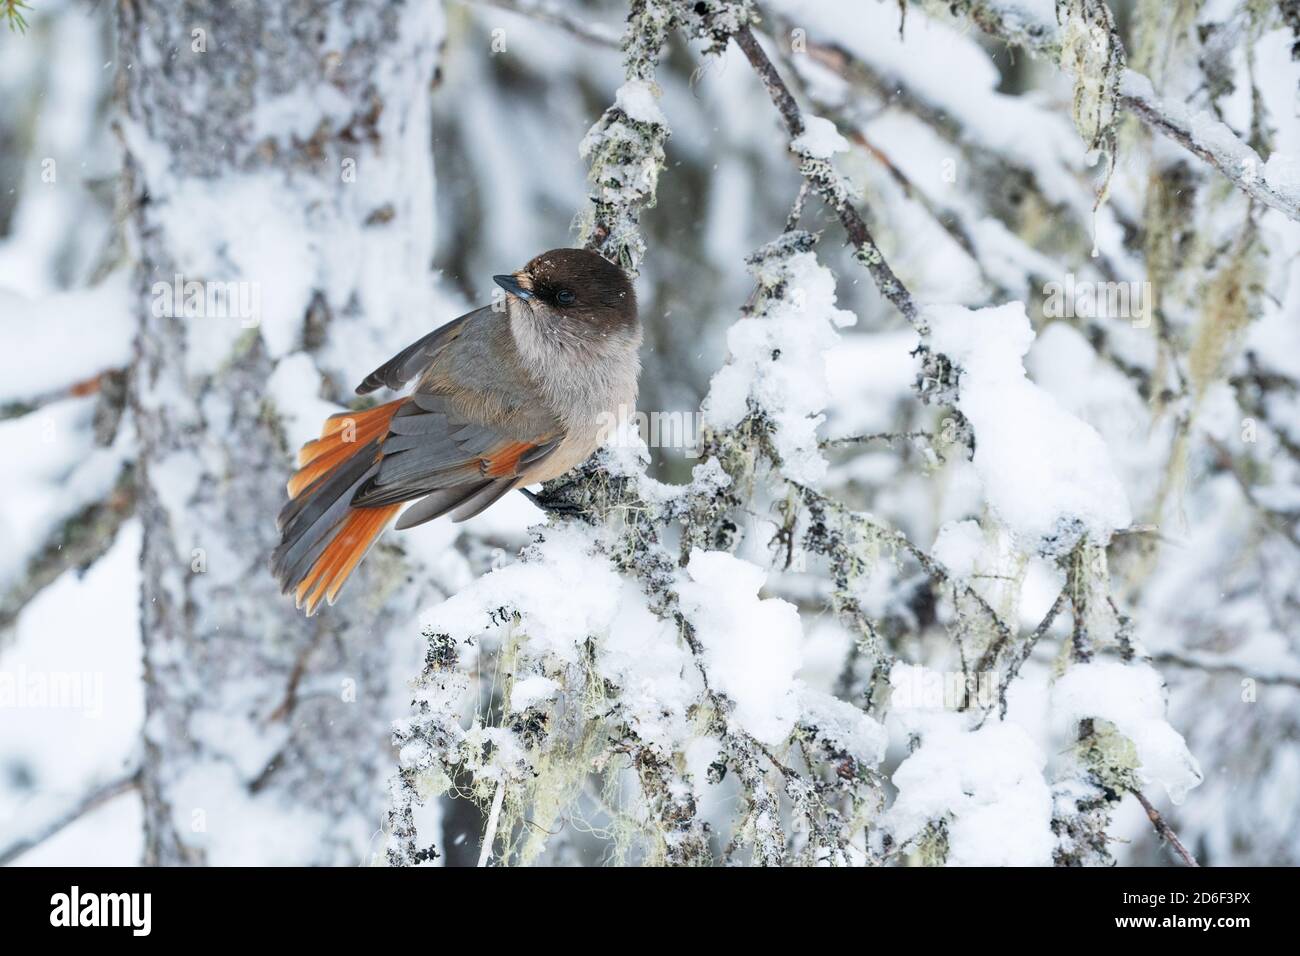 Curious Siberian jay, Perisoreus infaustus, during a beautiful wintery day in Lapland, Northern Finland Stock Photo